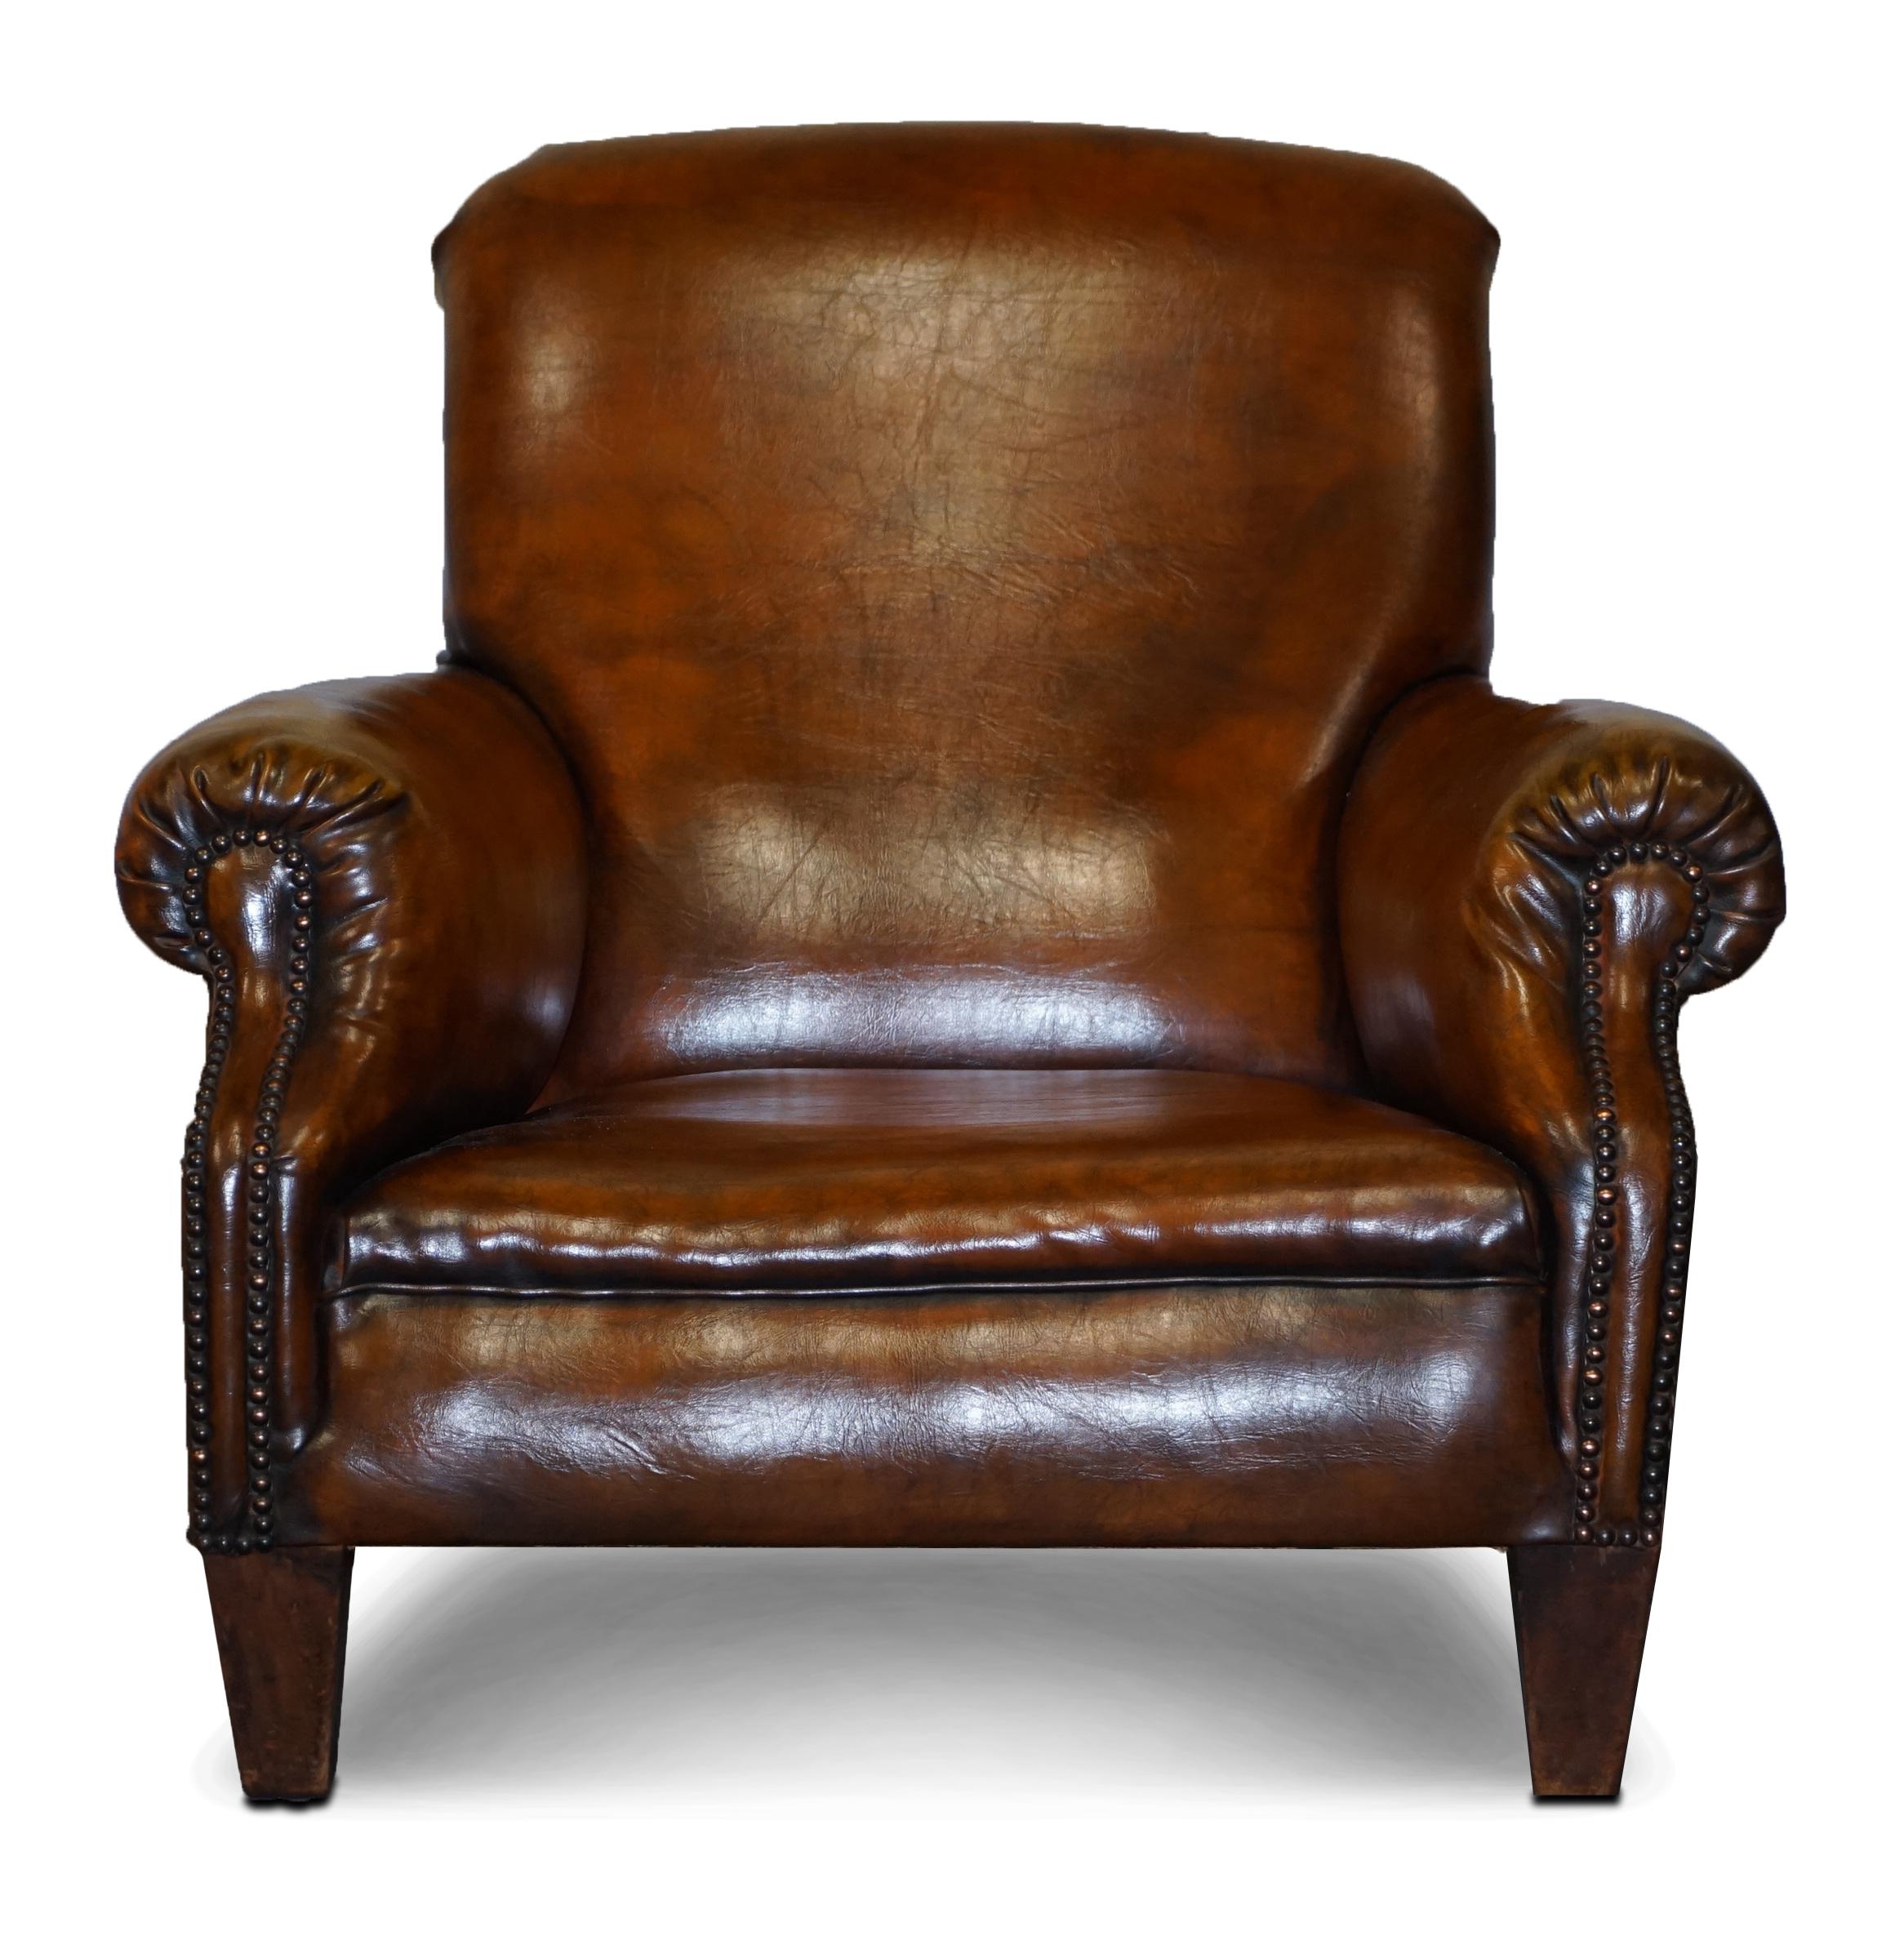 We are delighted to offer for sale this stunning fully restored Victorian hand dyed Cigar brown leather club armchair made in the style of Howard & Son’s

A very good looking well made and comfortable armchair, the leather is thick saddle hide